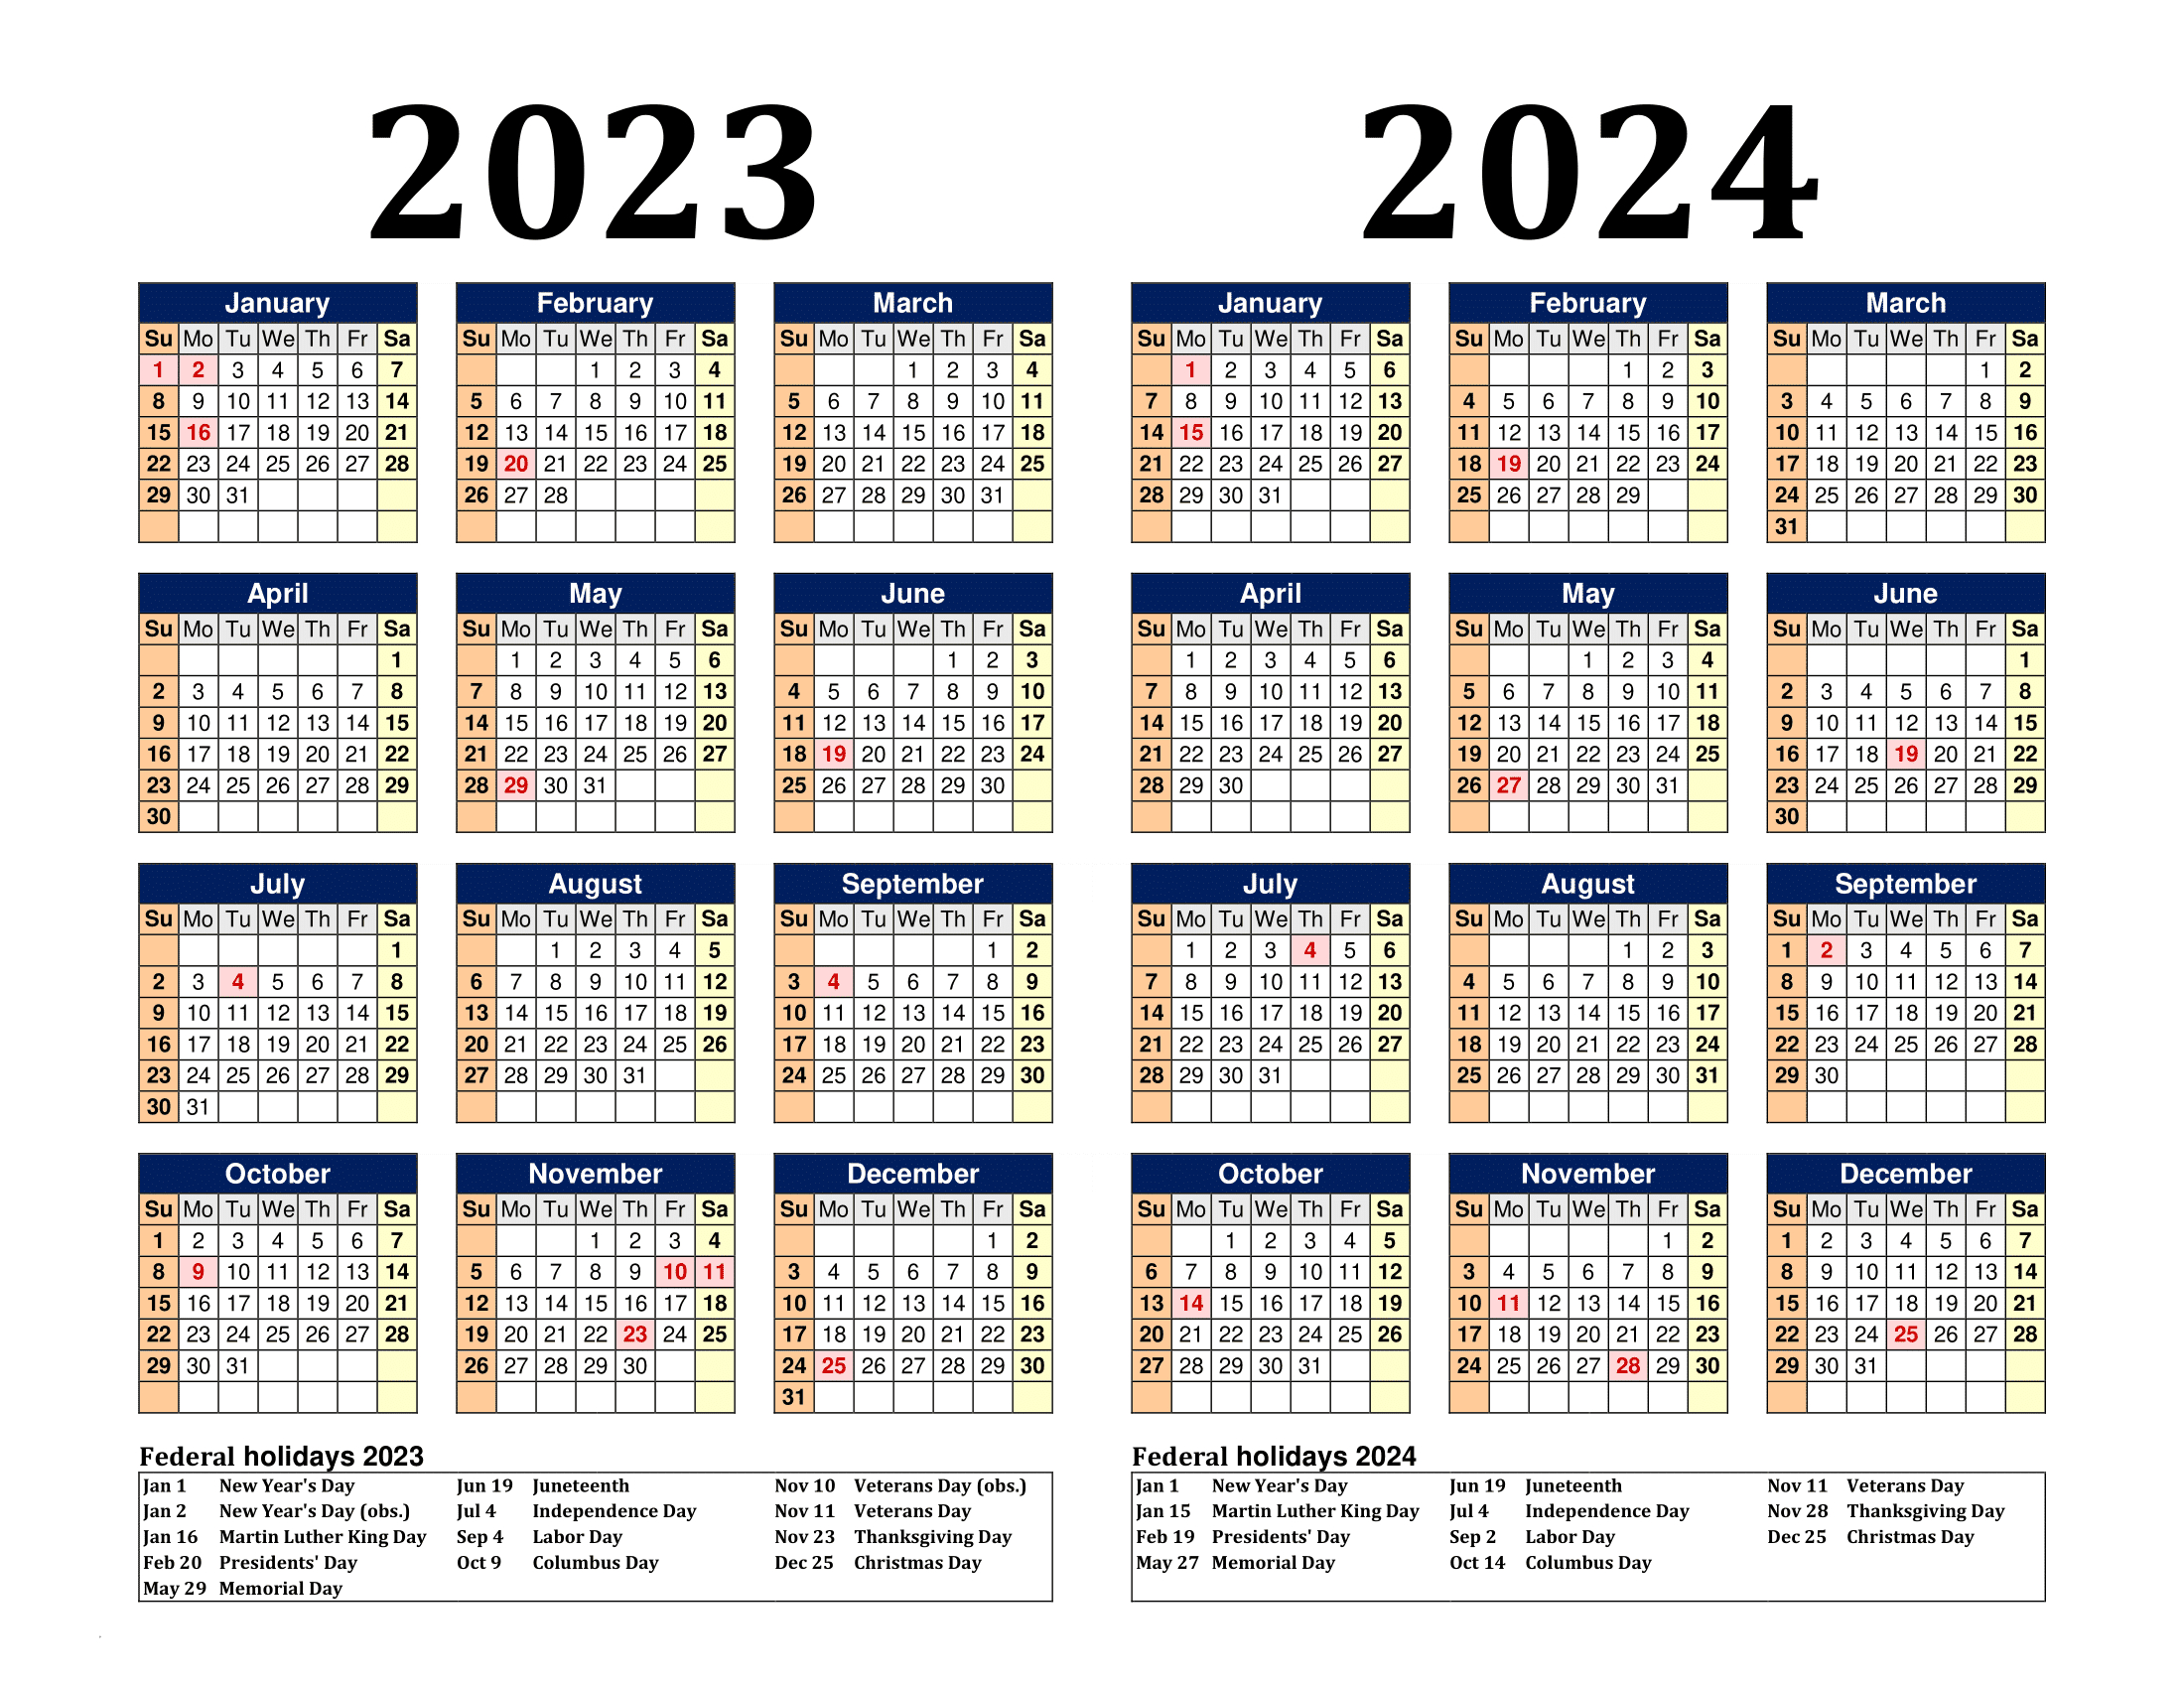 Free Printable Two Year Calendar Templates For 2023 And 2024 In Pdf |  Calendar 2024